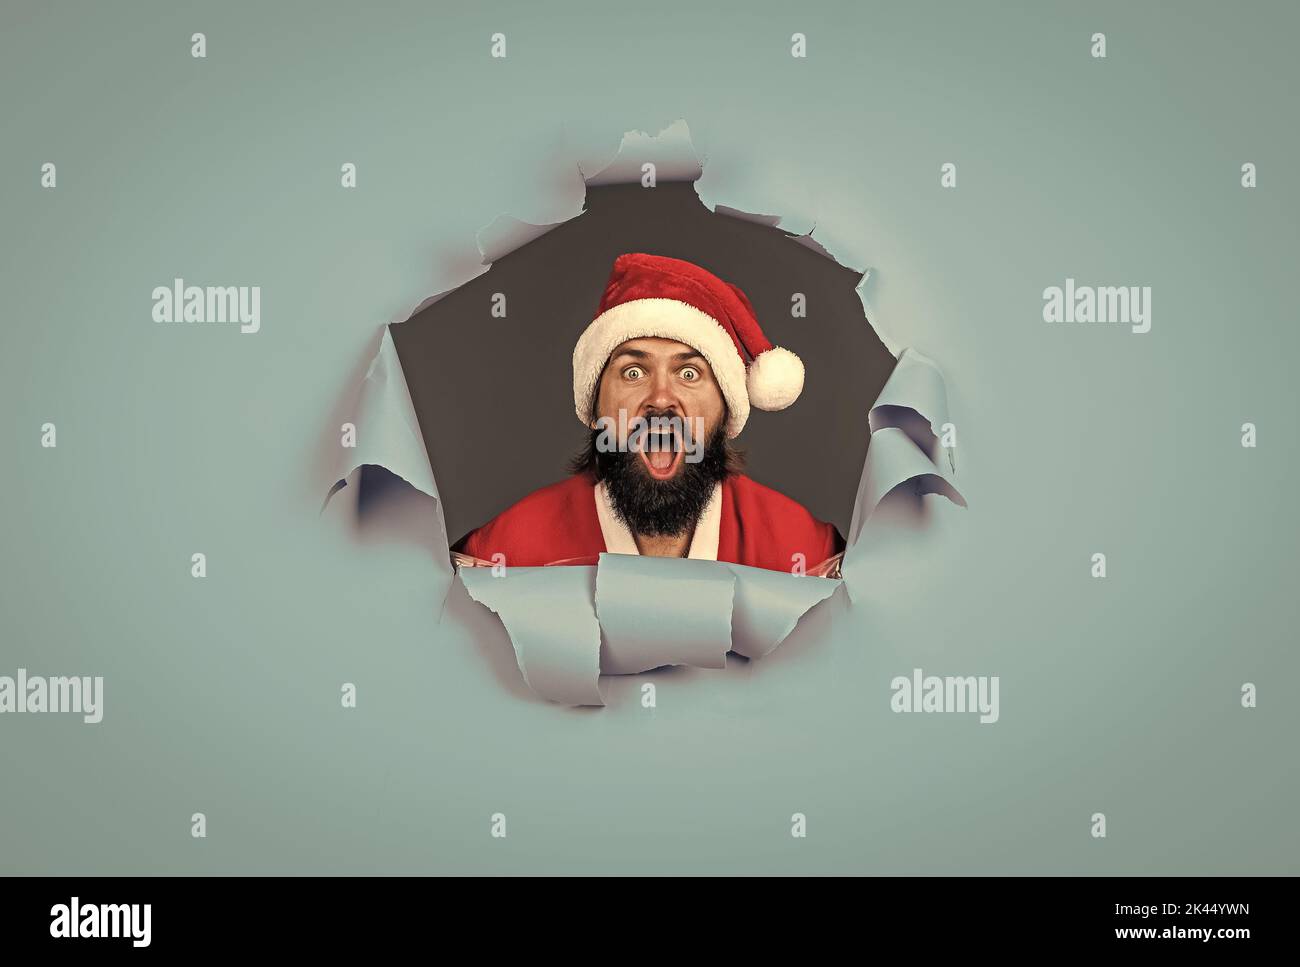 santa claus bearded man wish happy new year and merry christmas holiday ready to celebrate winter party with fun and joy full of xmas presents and Stock Photo